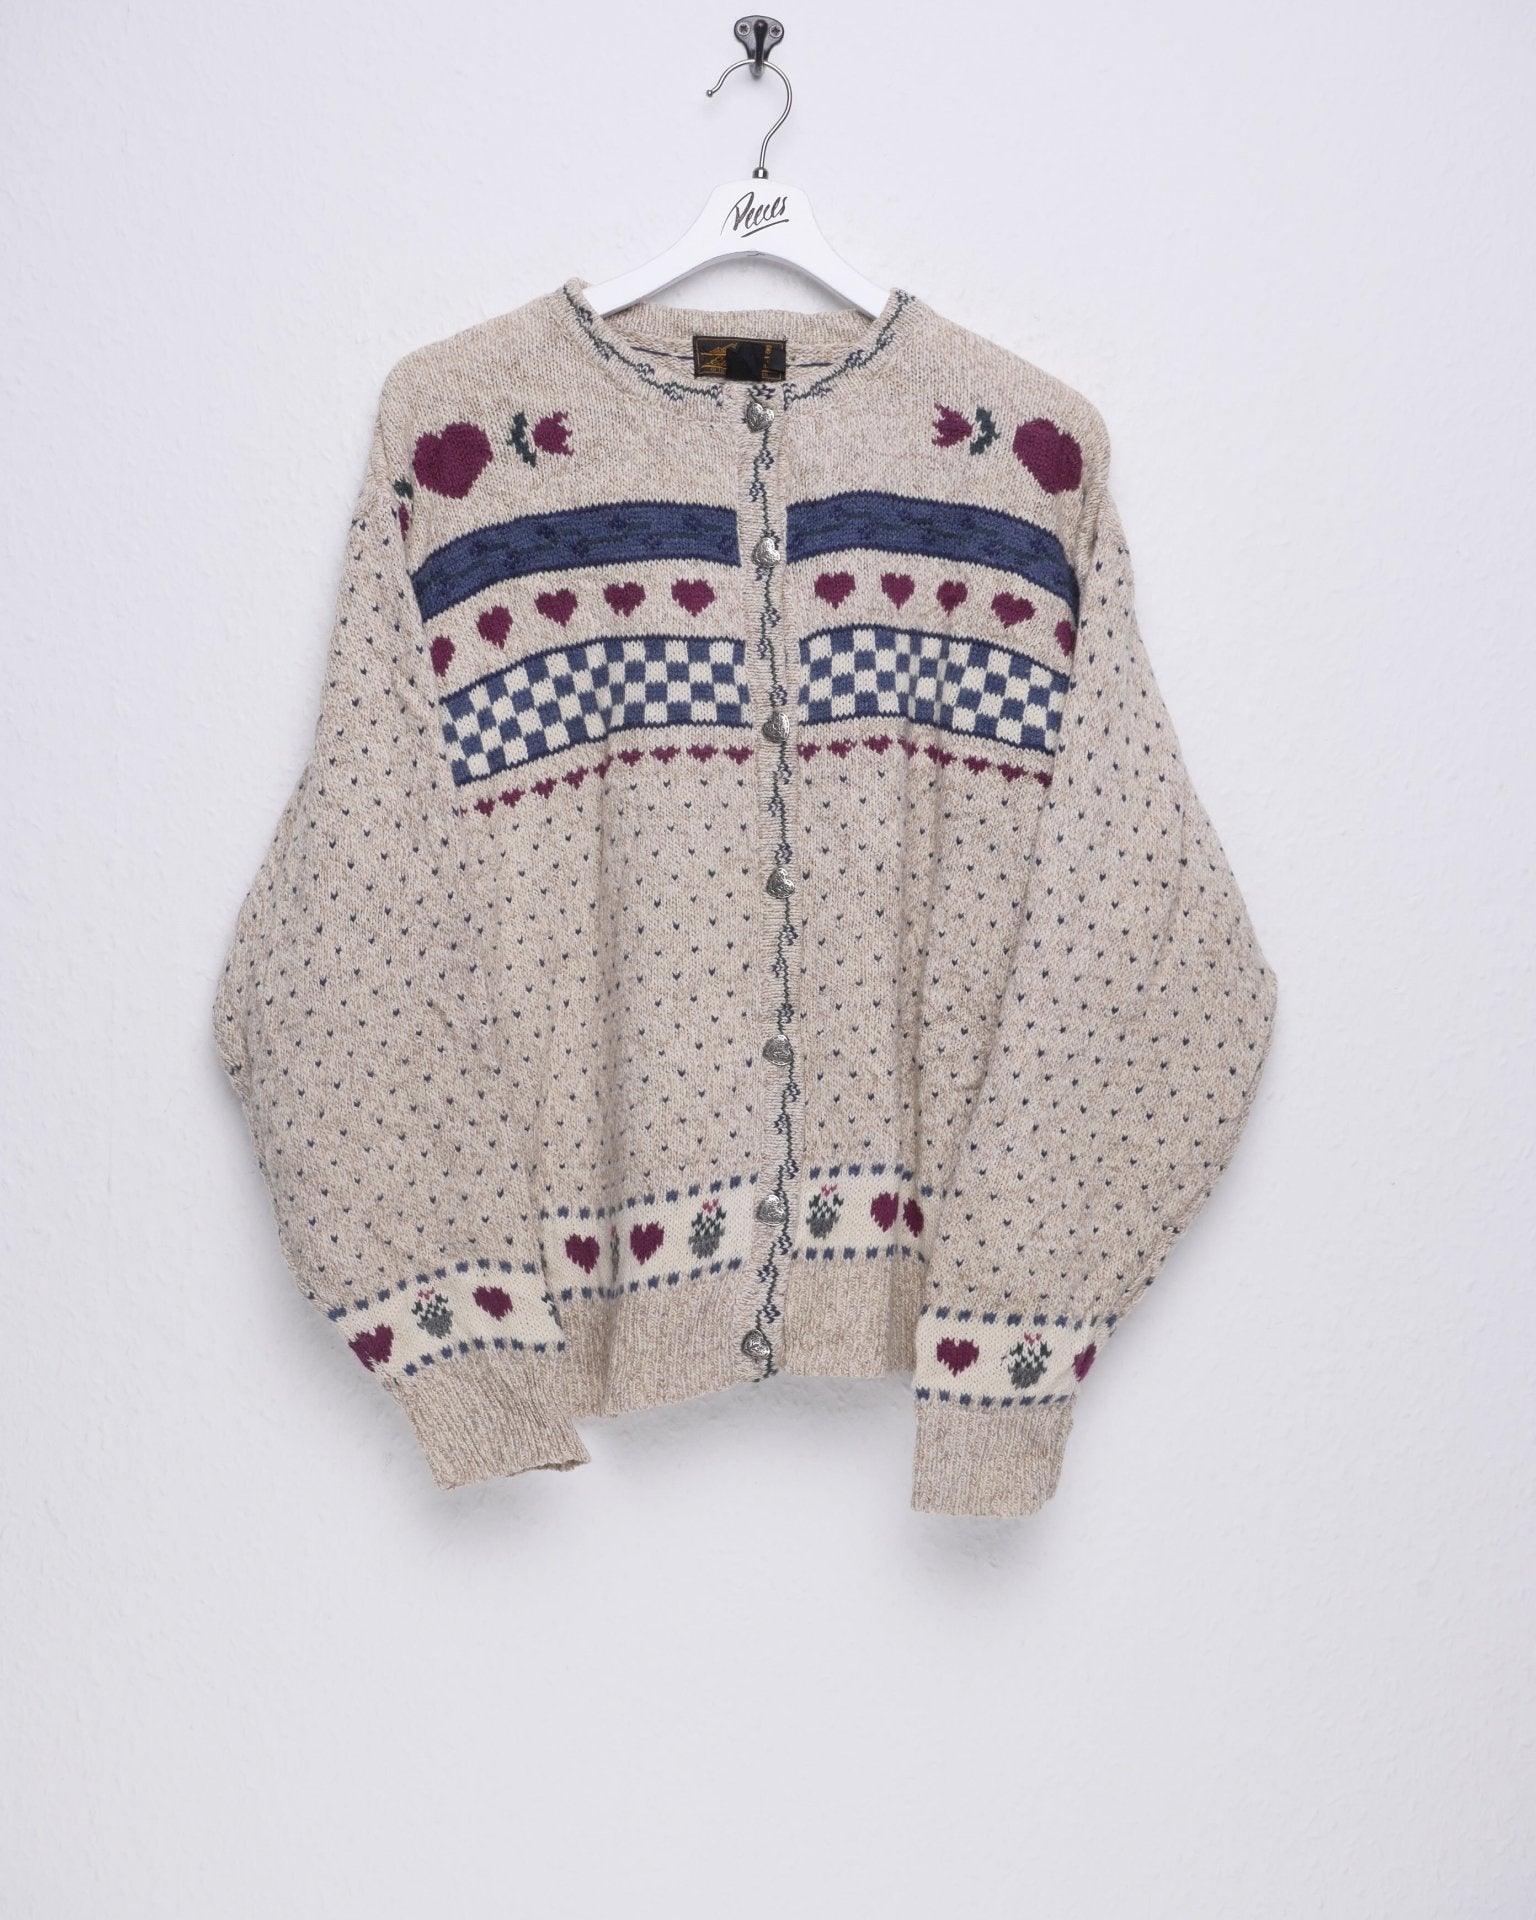 knitted patterned beige Vintage Cardigan Sweater - Peeces